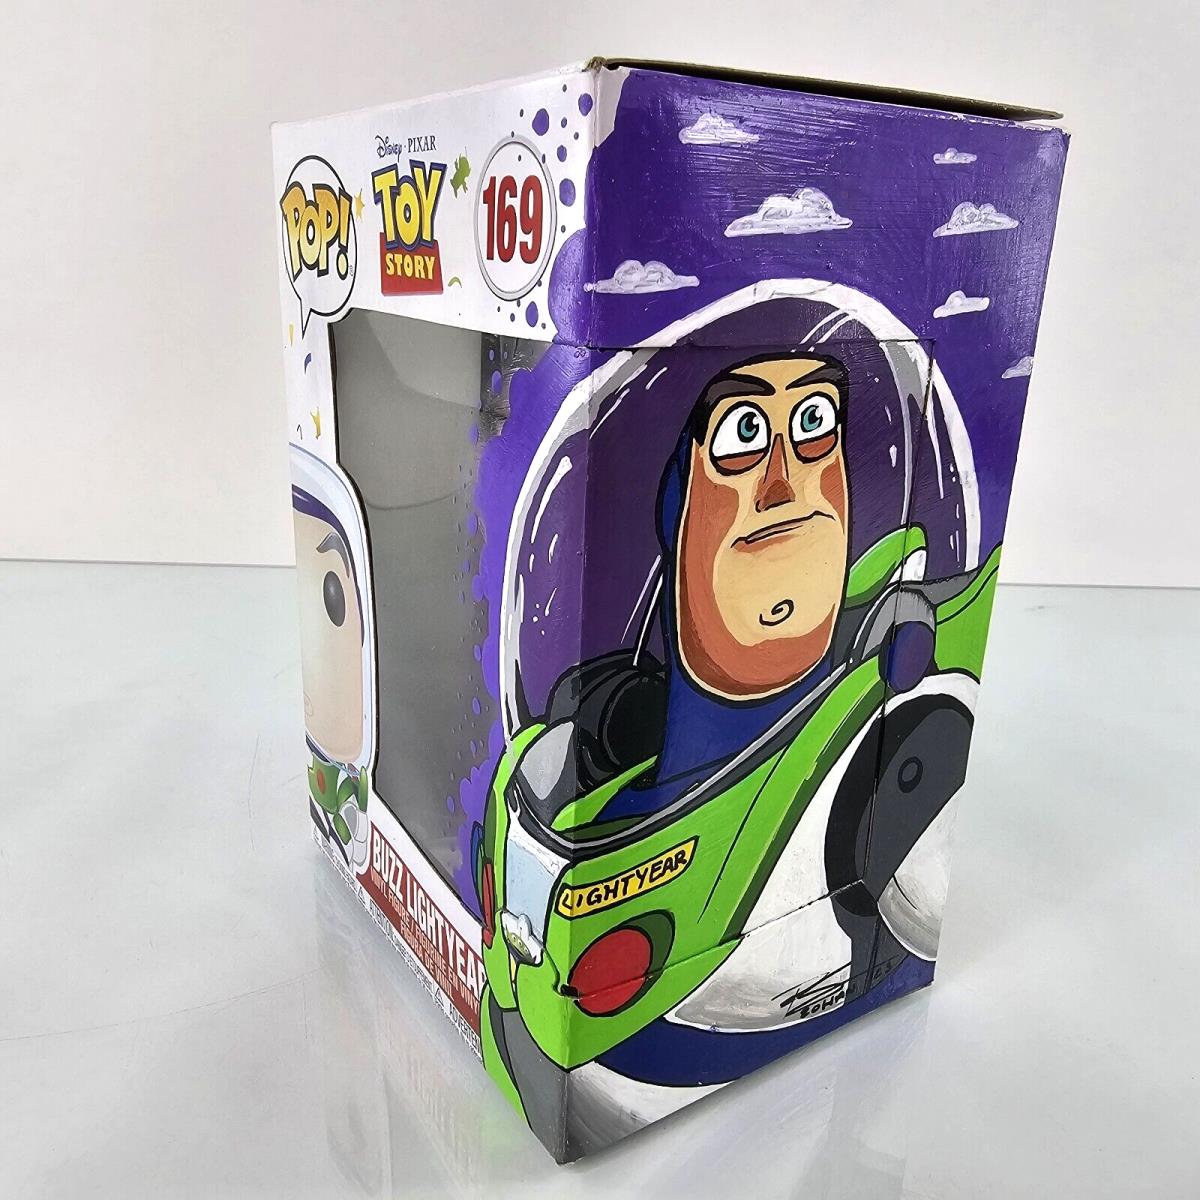 Funko Pop Toy Story Buzz Lightyear 169 Art Box Hand Painted by B Zohan Signed